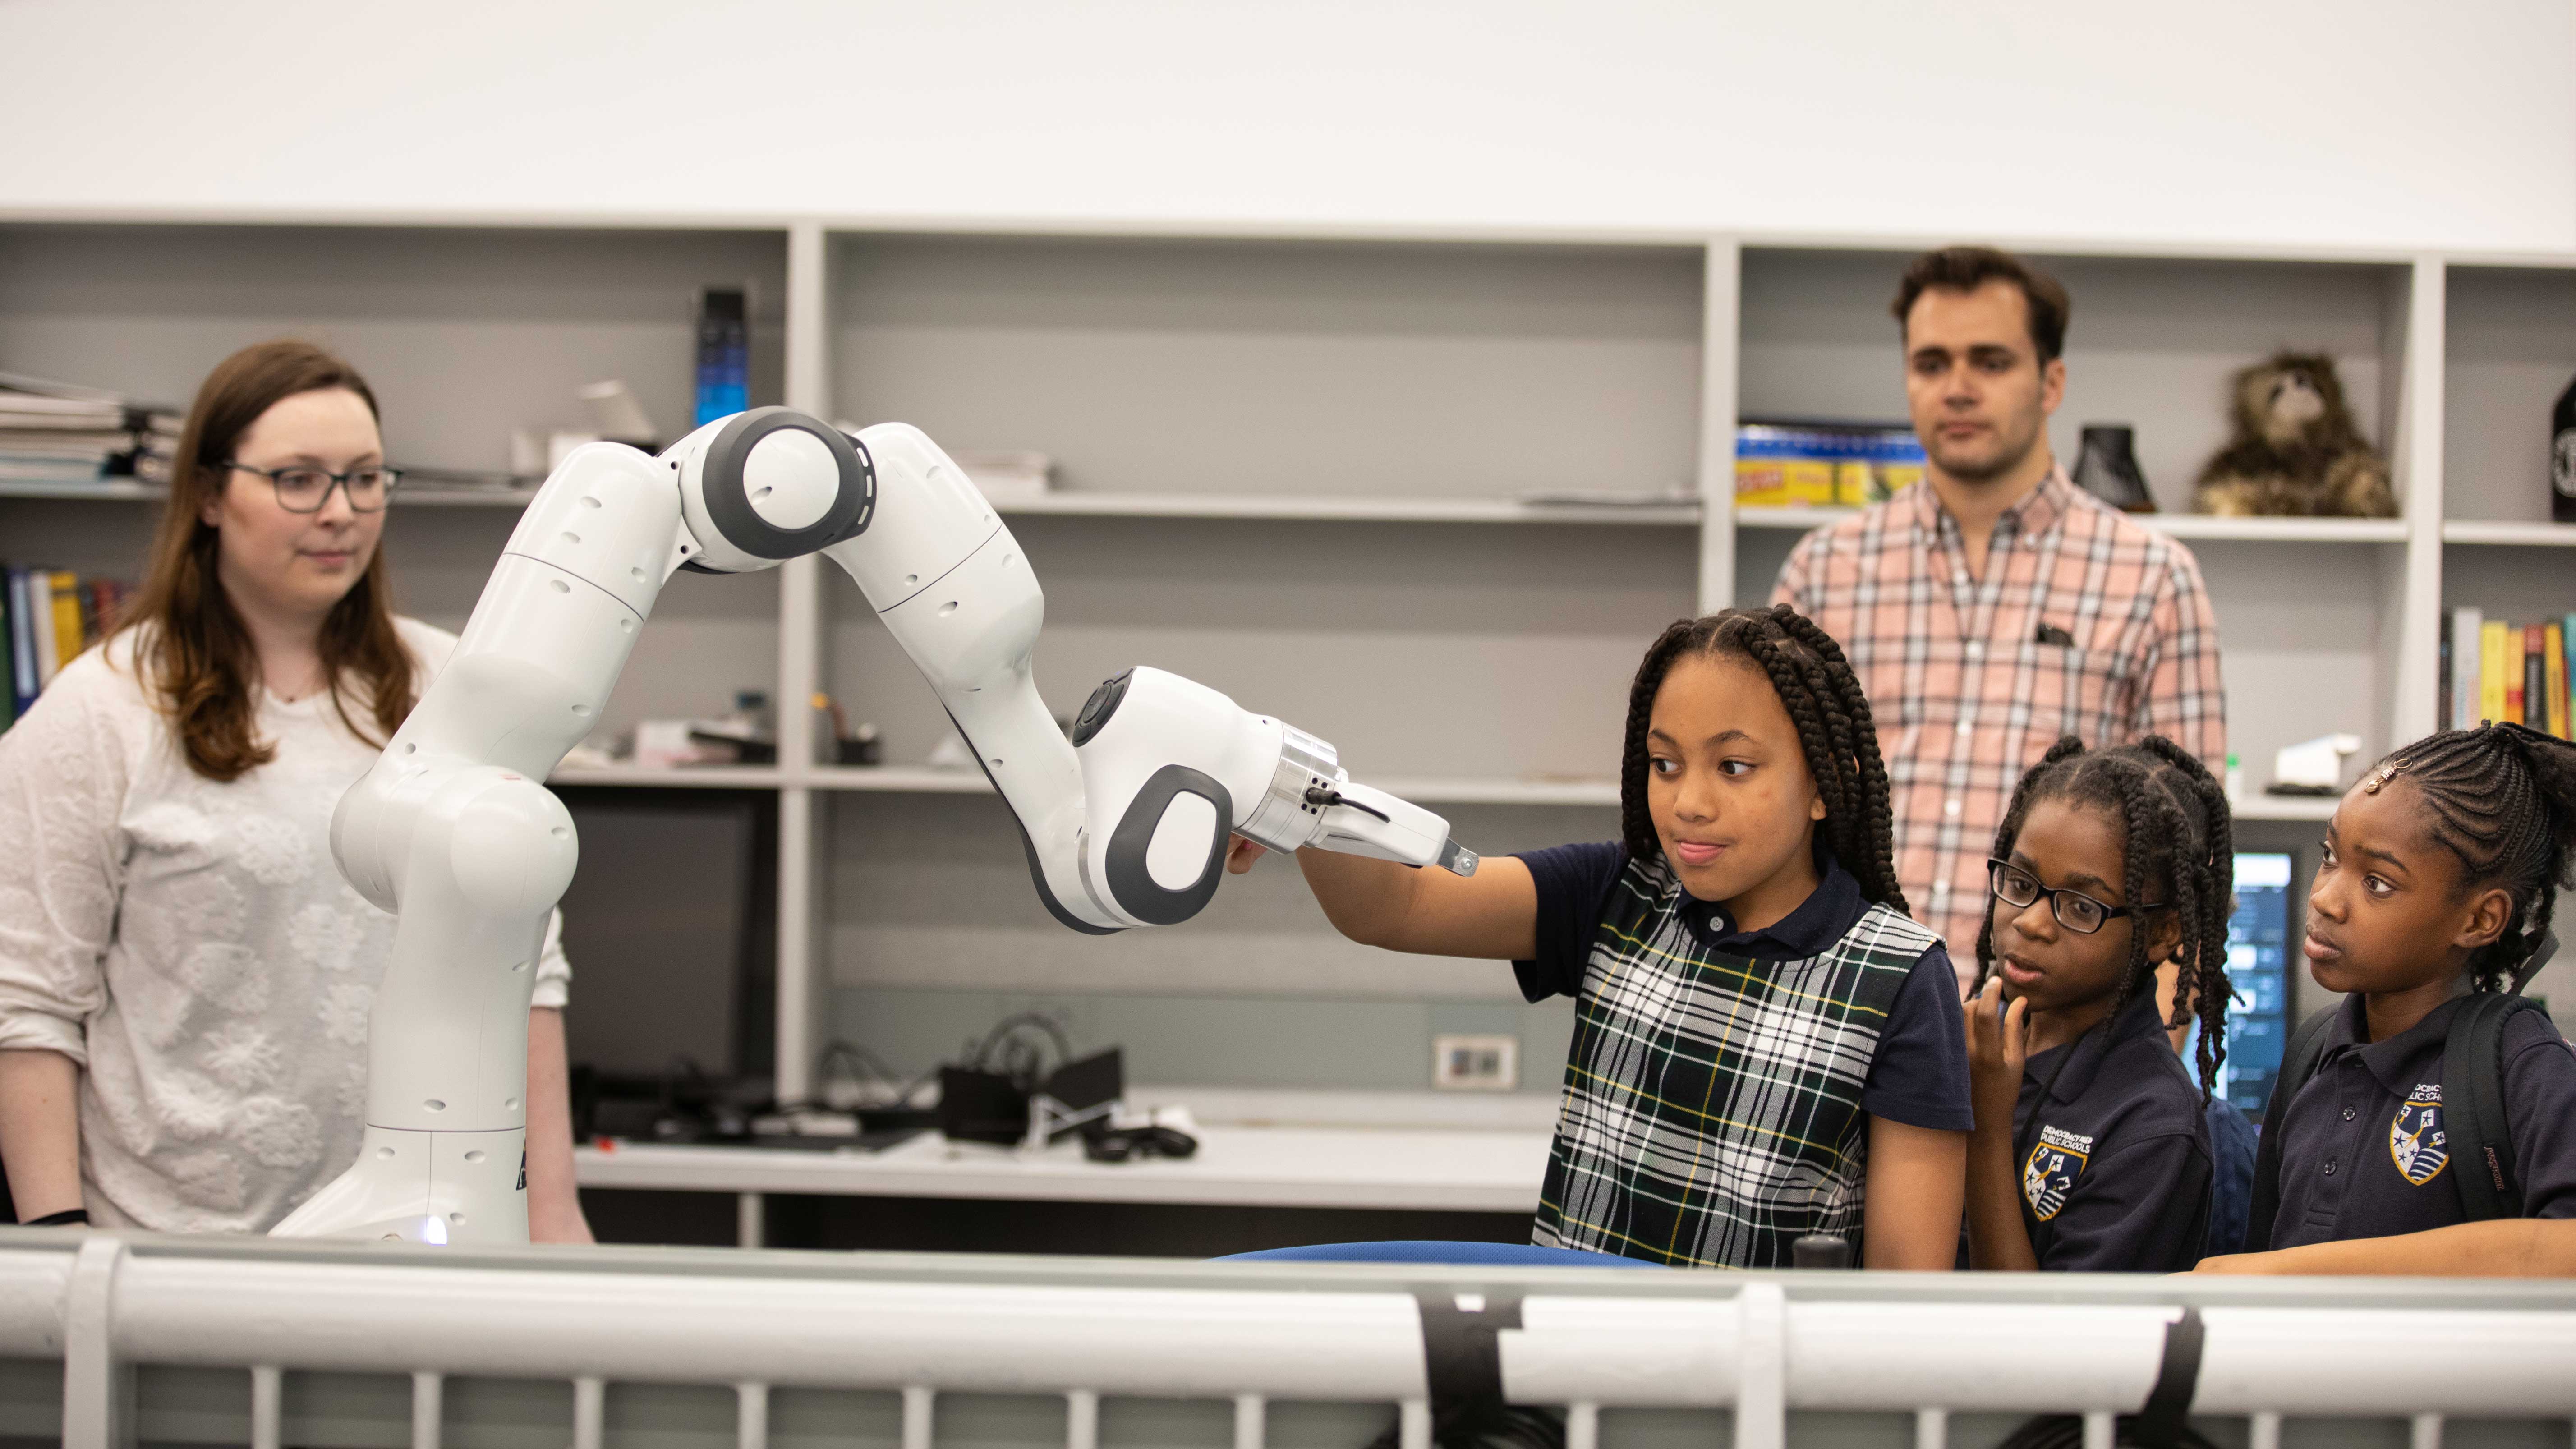 Elementary school students manipulate a robotic arm